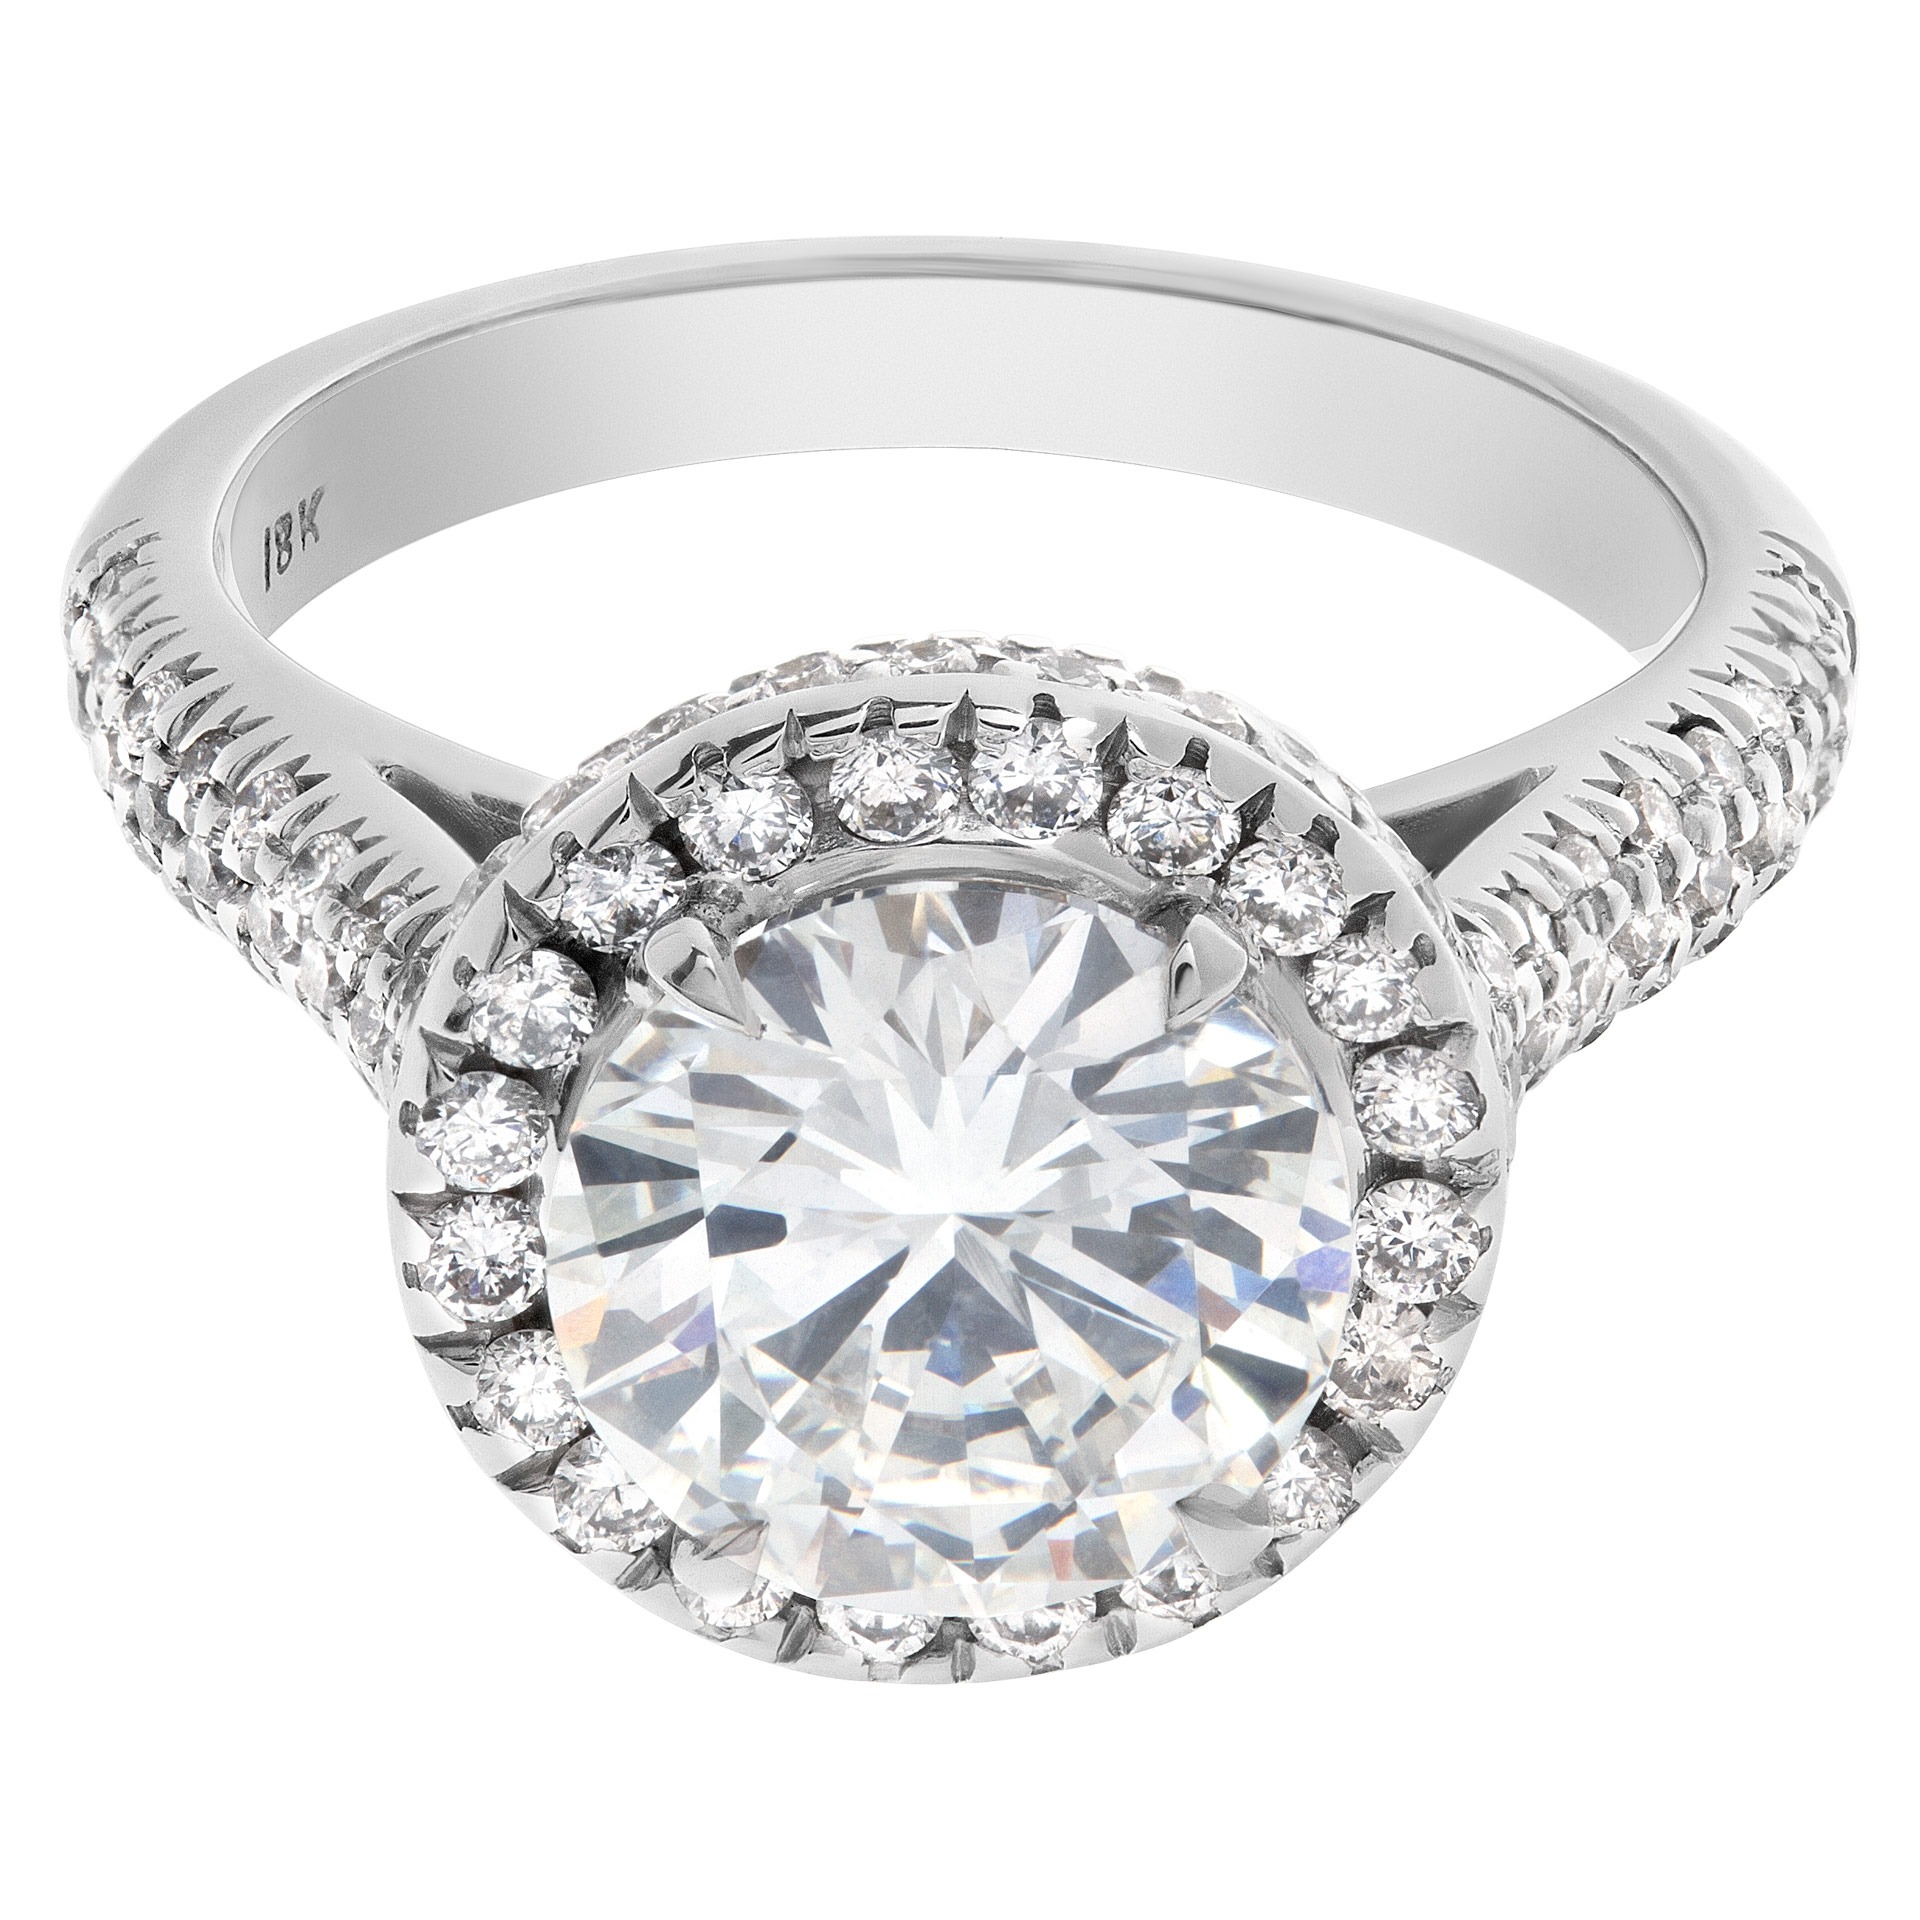 GIA Certified Round Brilliant  Cut Diamond Ring  2.01 Carats(F Color Si1 Clarity) Set In  18k White image 3